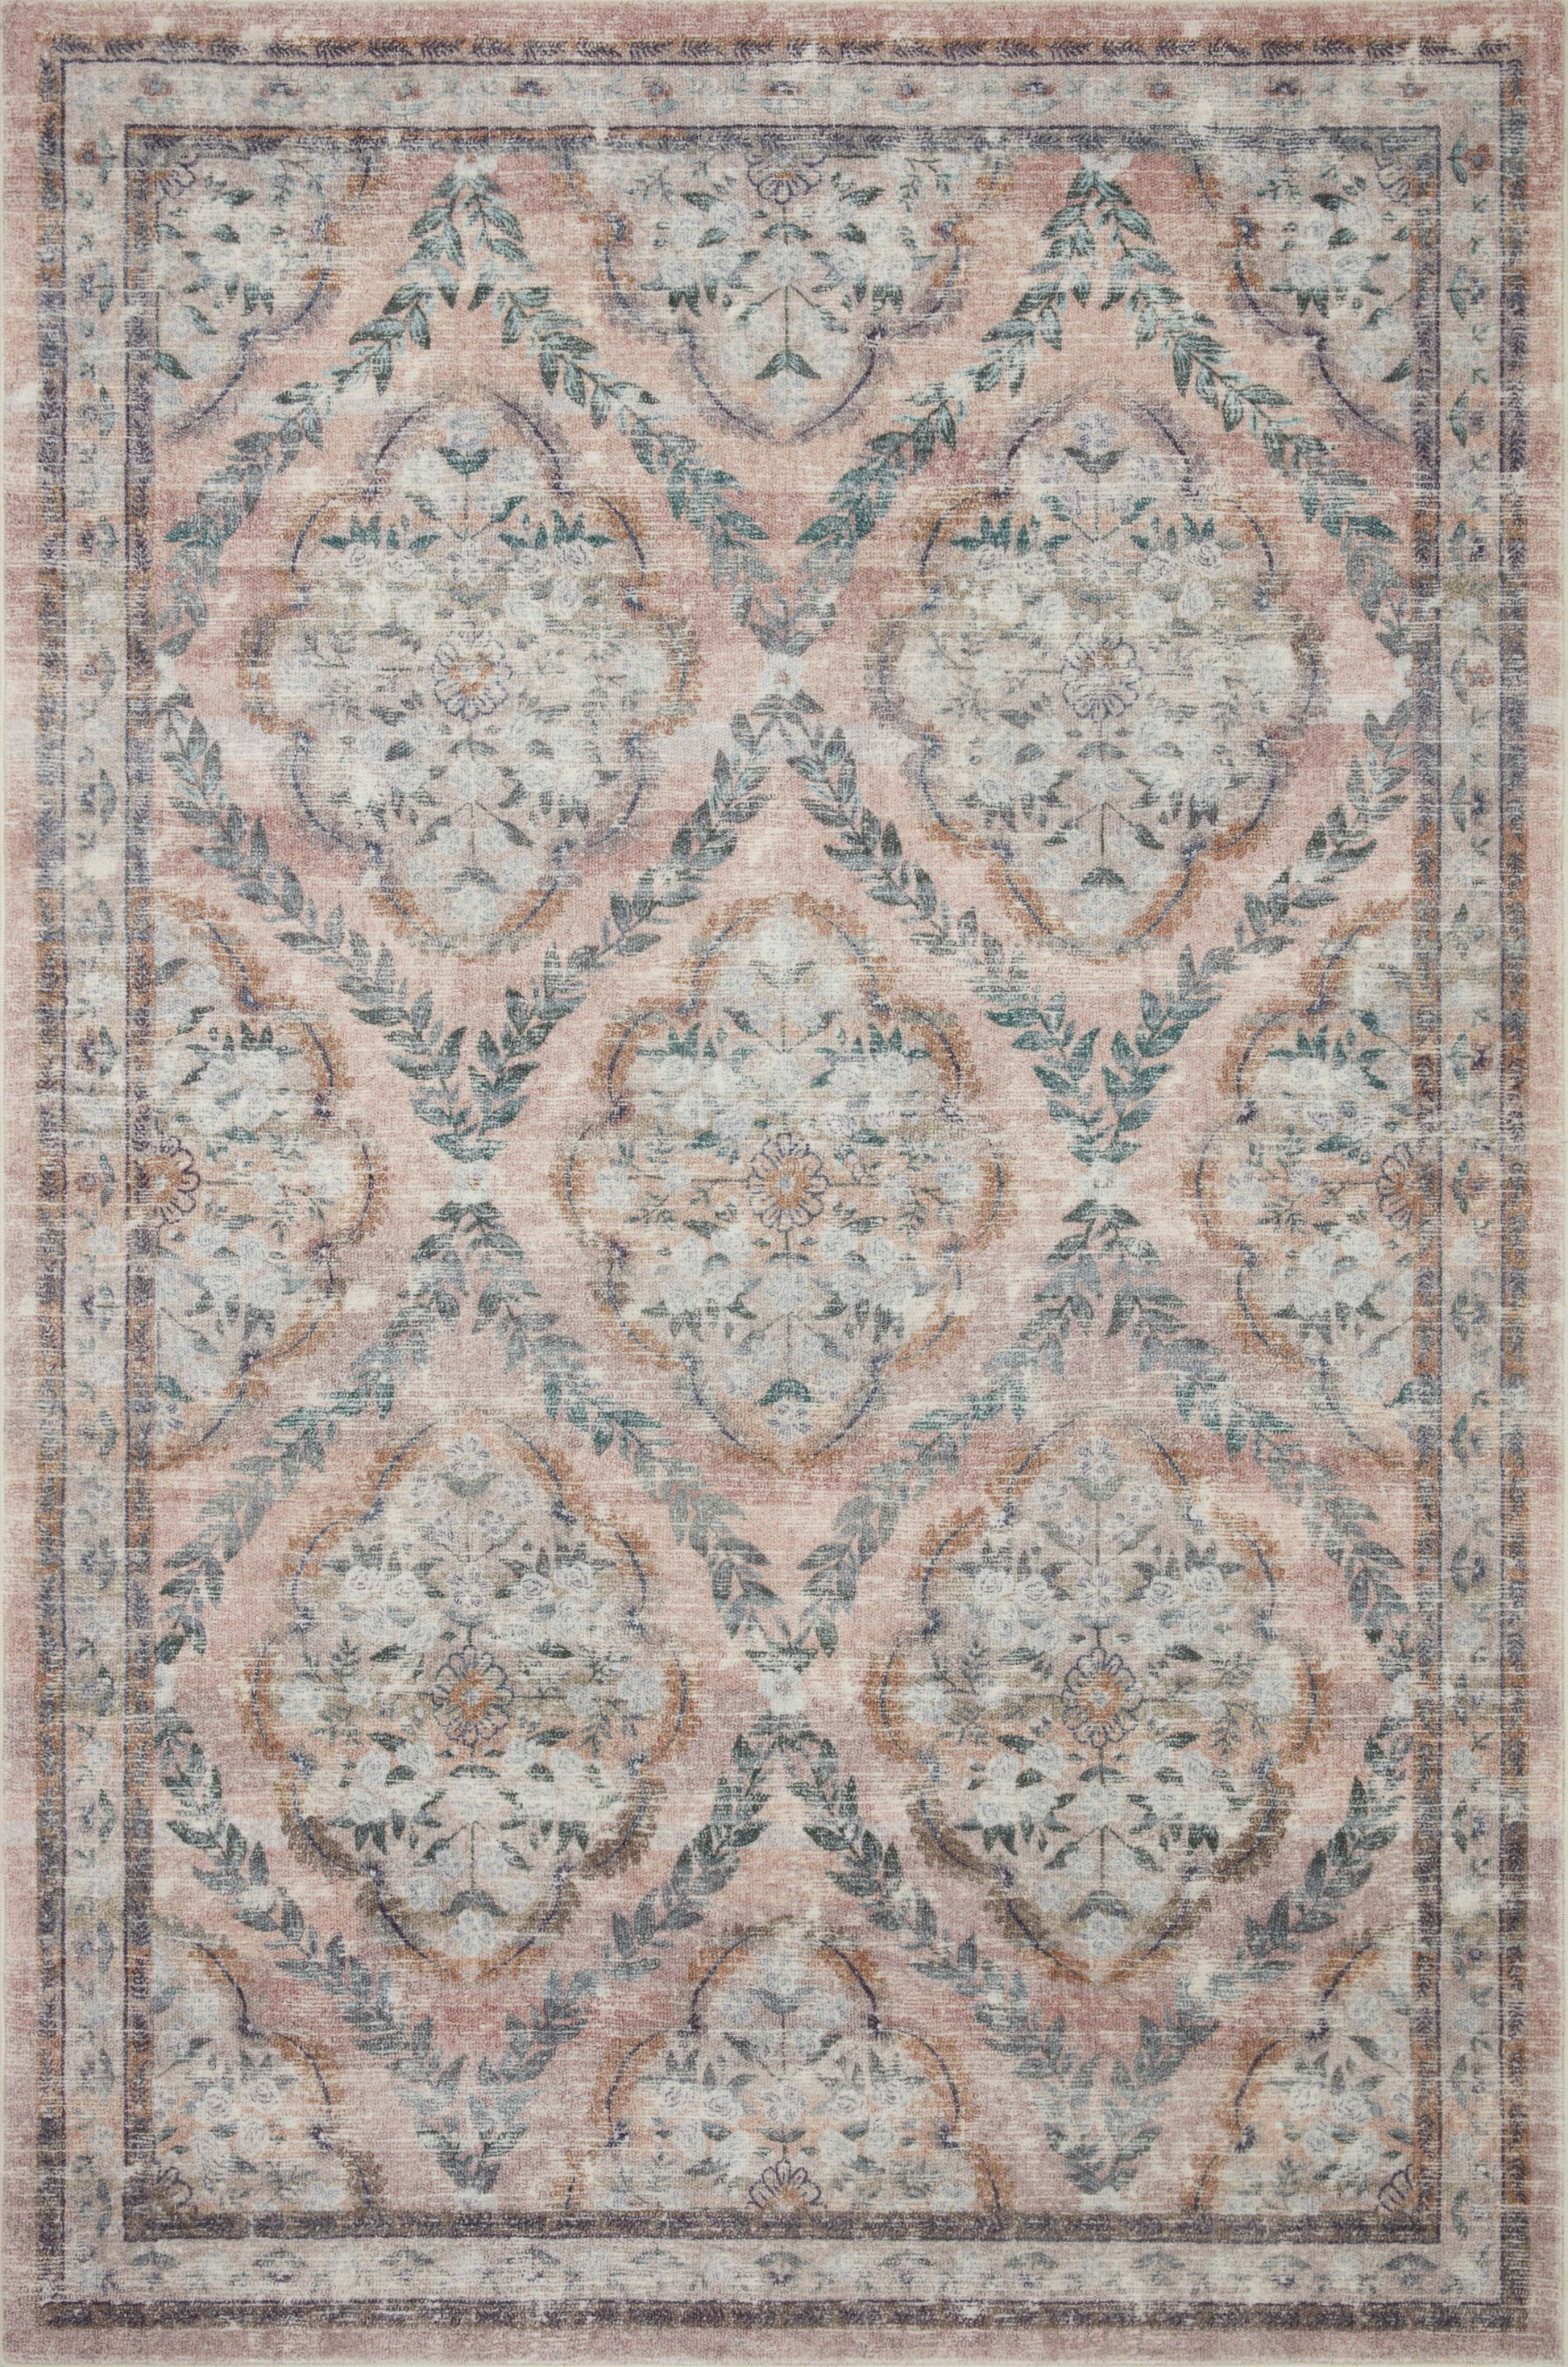 A picture of Loloi's Courtyard rug, in style COU-02, color Blush